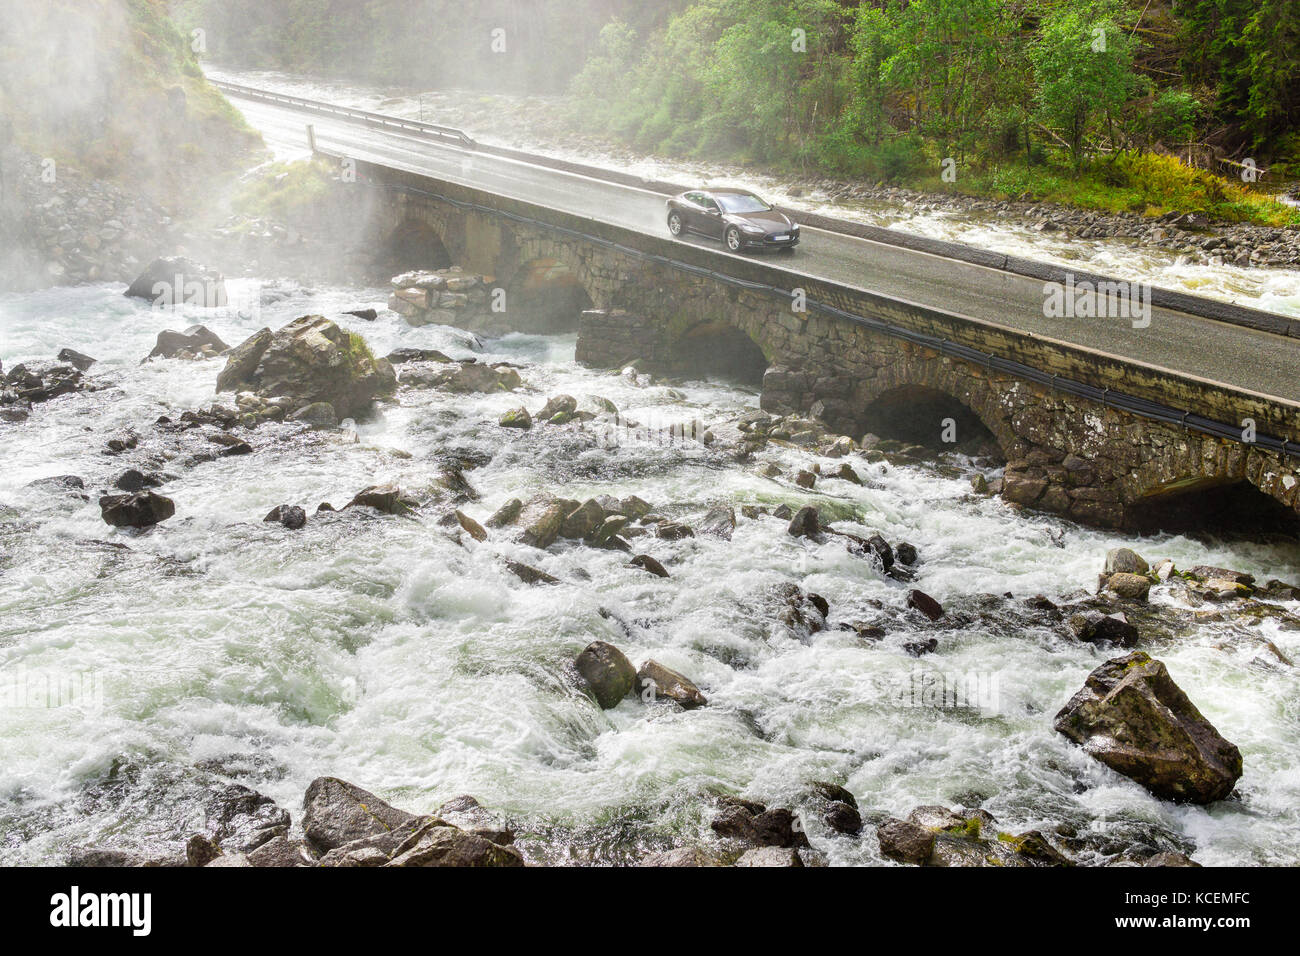 Electric car driving on bridge crossing river. Renewable energy from hydropower concept. Stock Photo